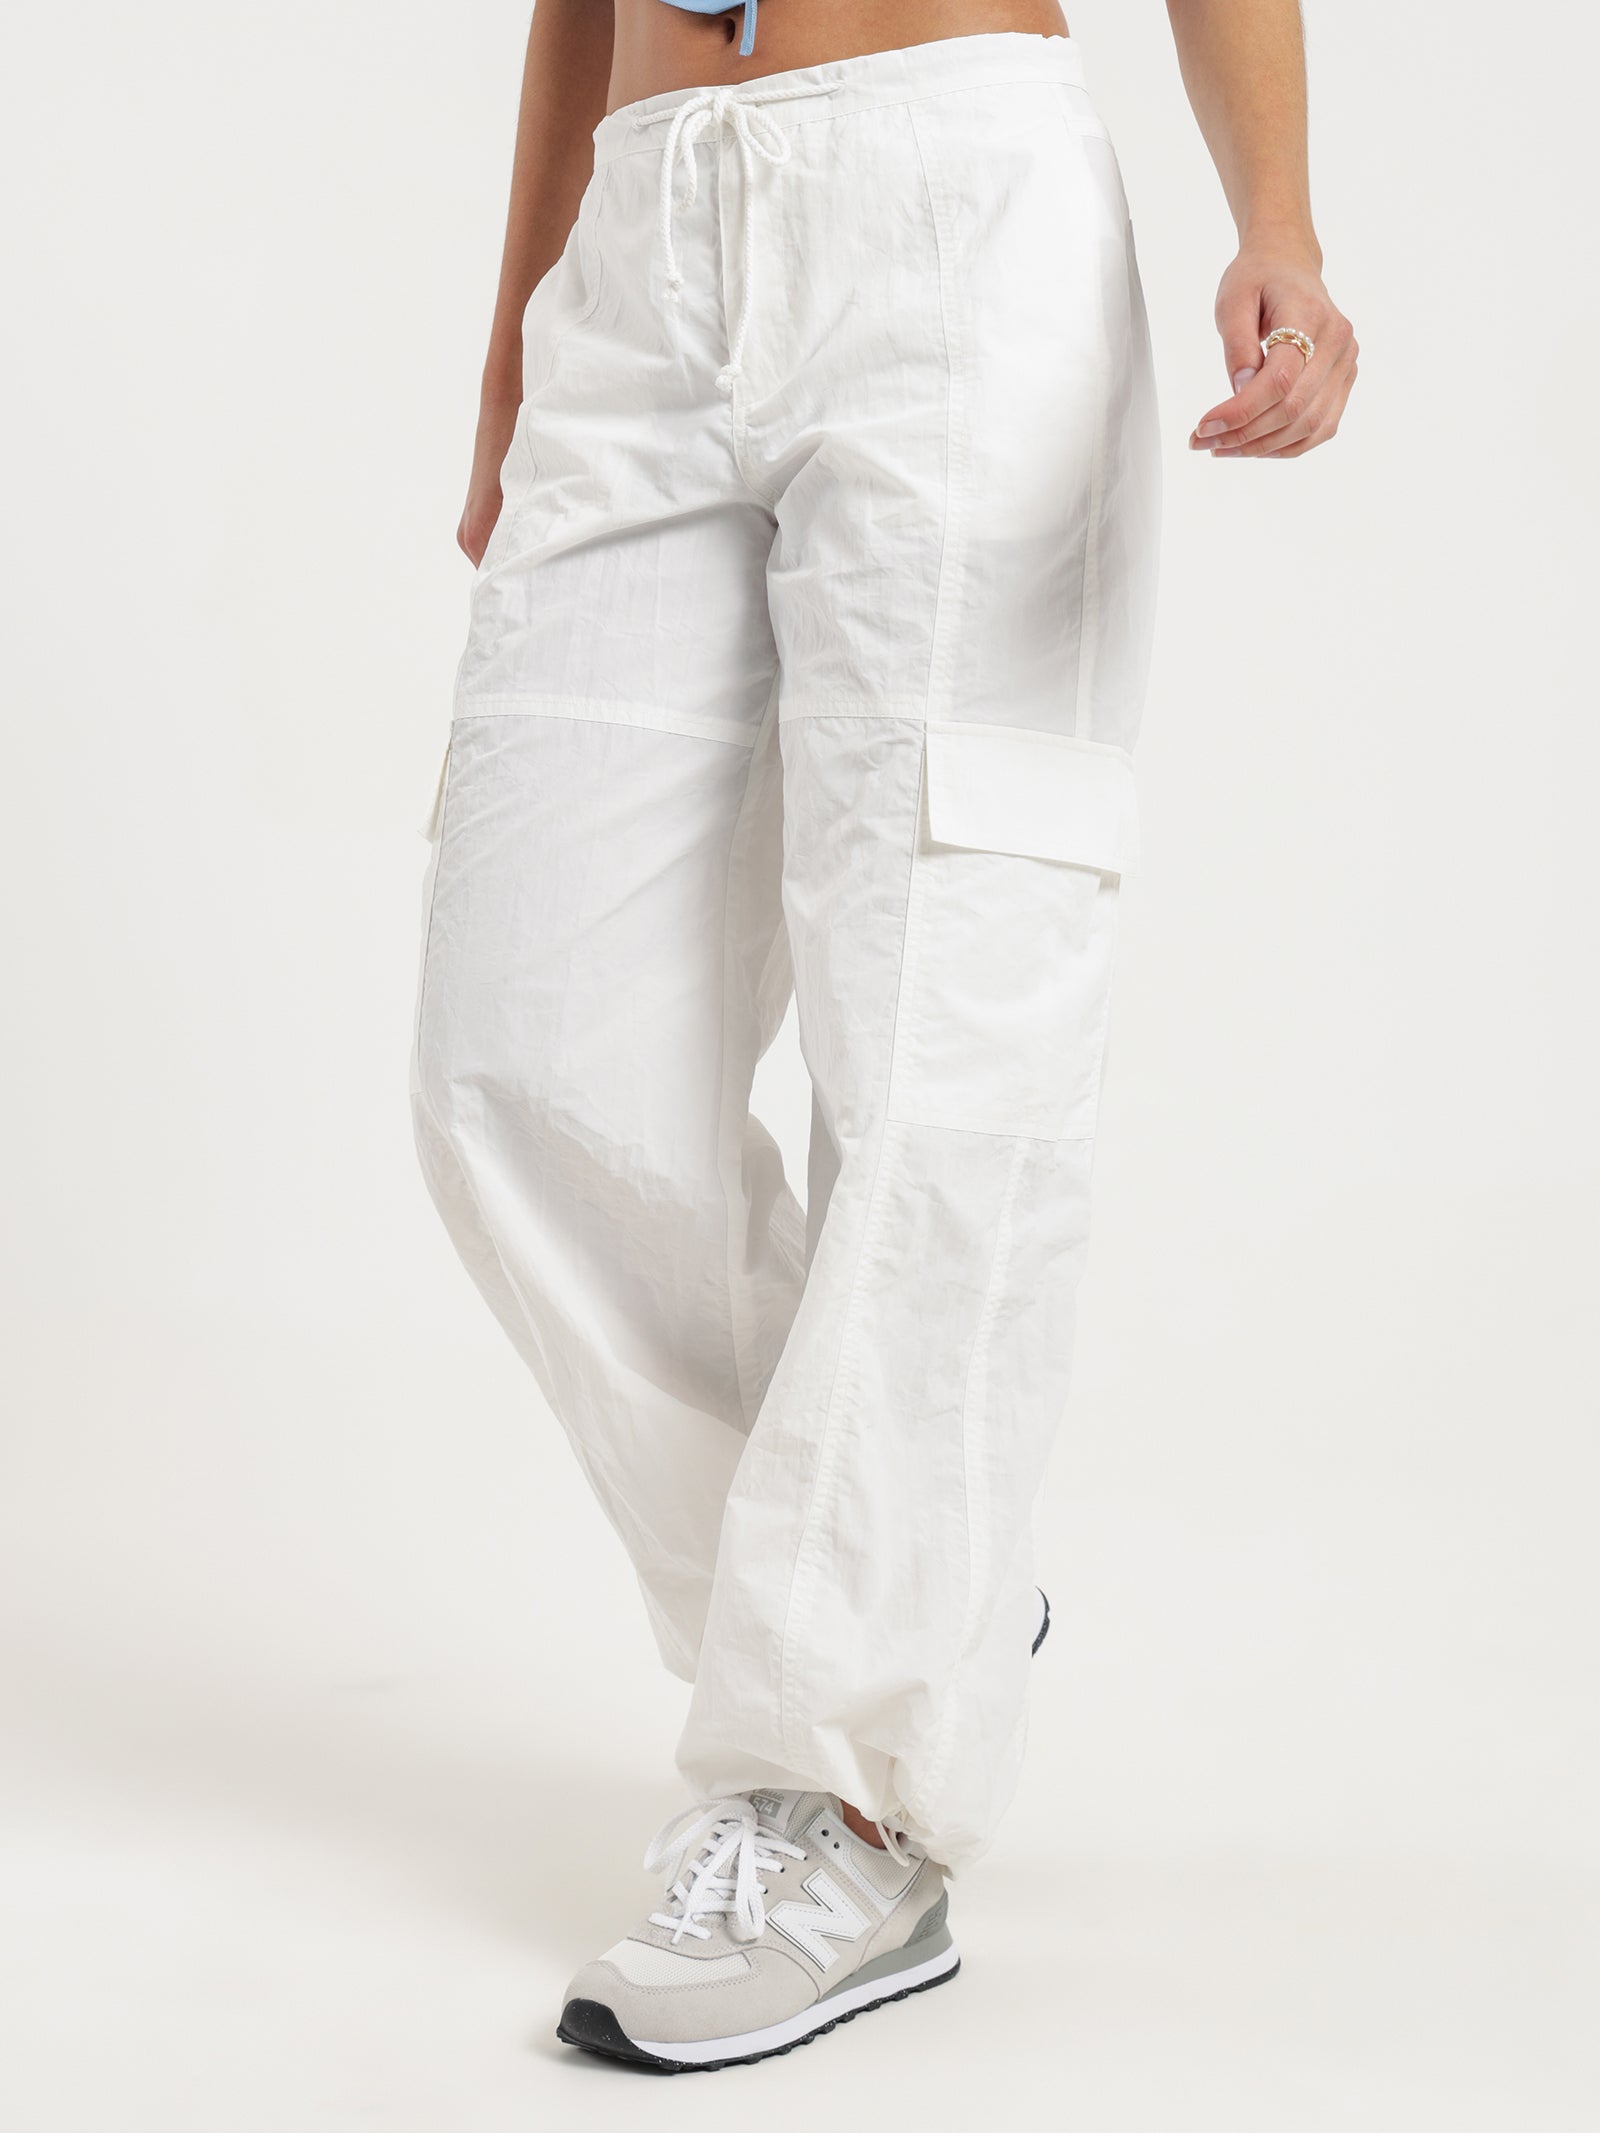 Parachute Cargo Pants in White - Glue Store